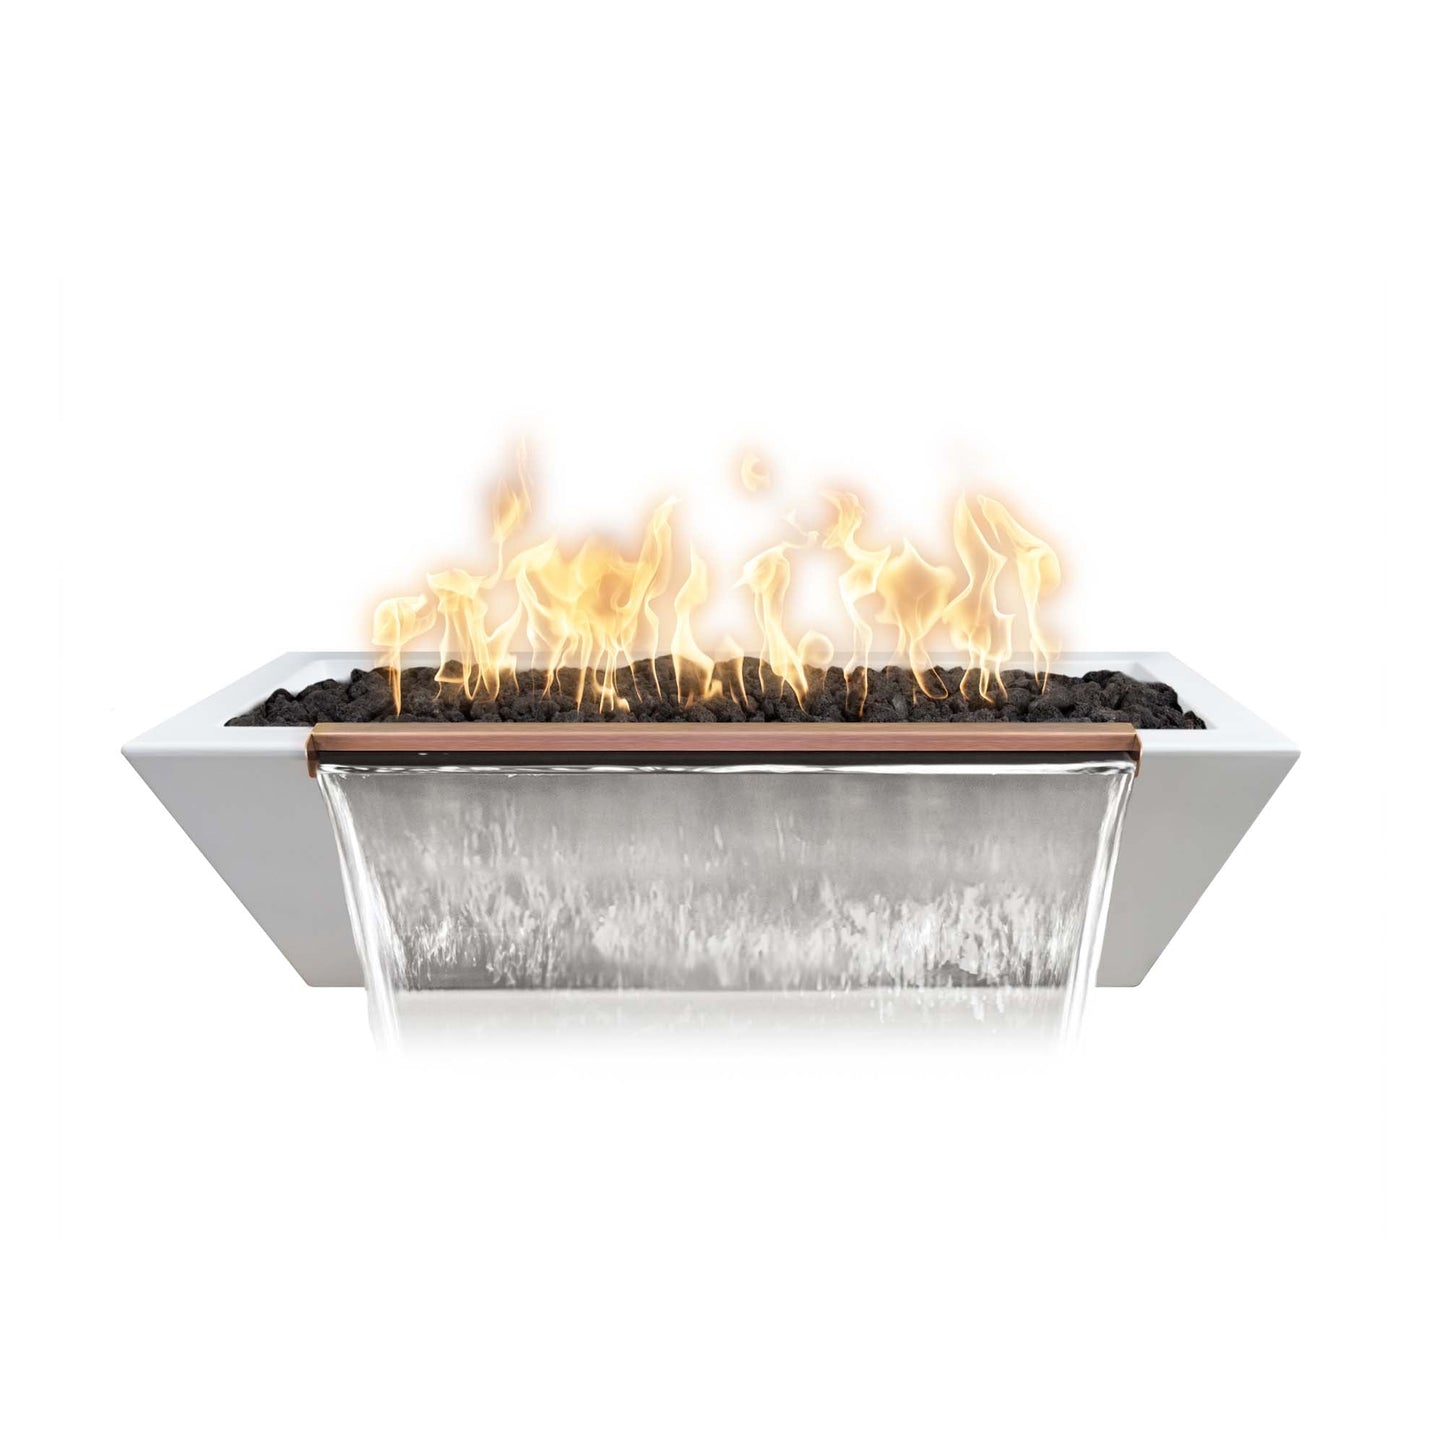 The Outdoor Plus Linear Maya 60" Vanilla GFRC Concrete Liquid Propane Fire & Water Bowl with Match Lit with Flame Sense Ignition